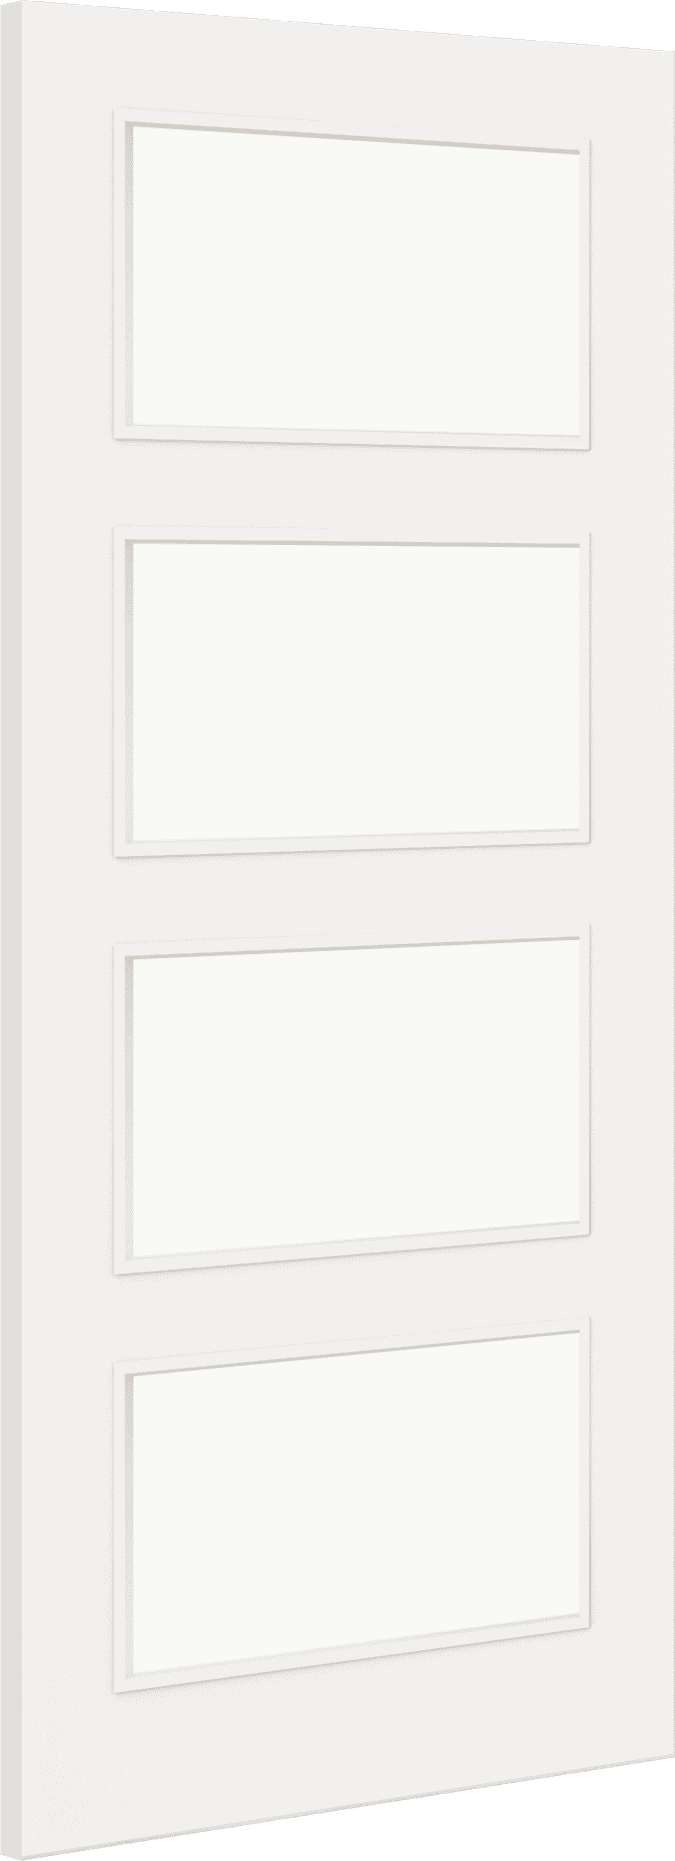 2040mm x 626mm x 44mm Architectural Paint Grade White 04 Clear Glazed Fire Door Blank